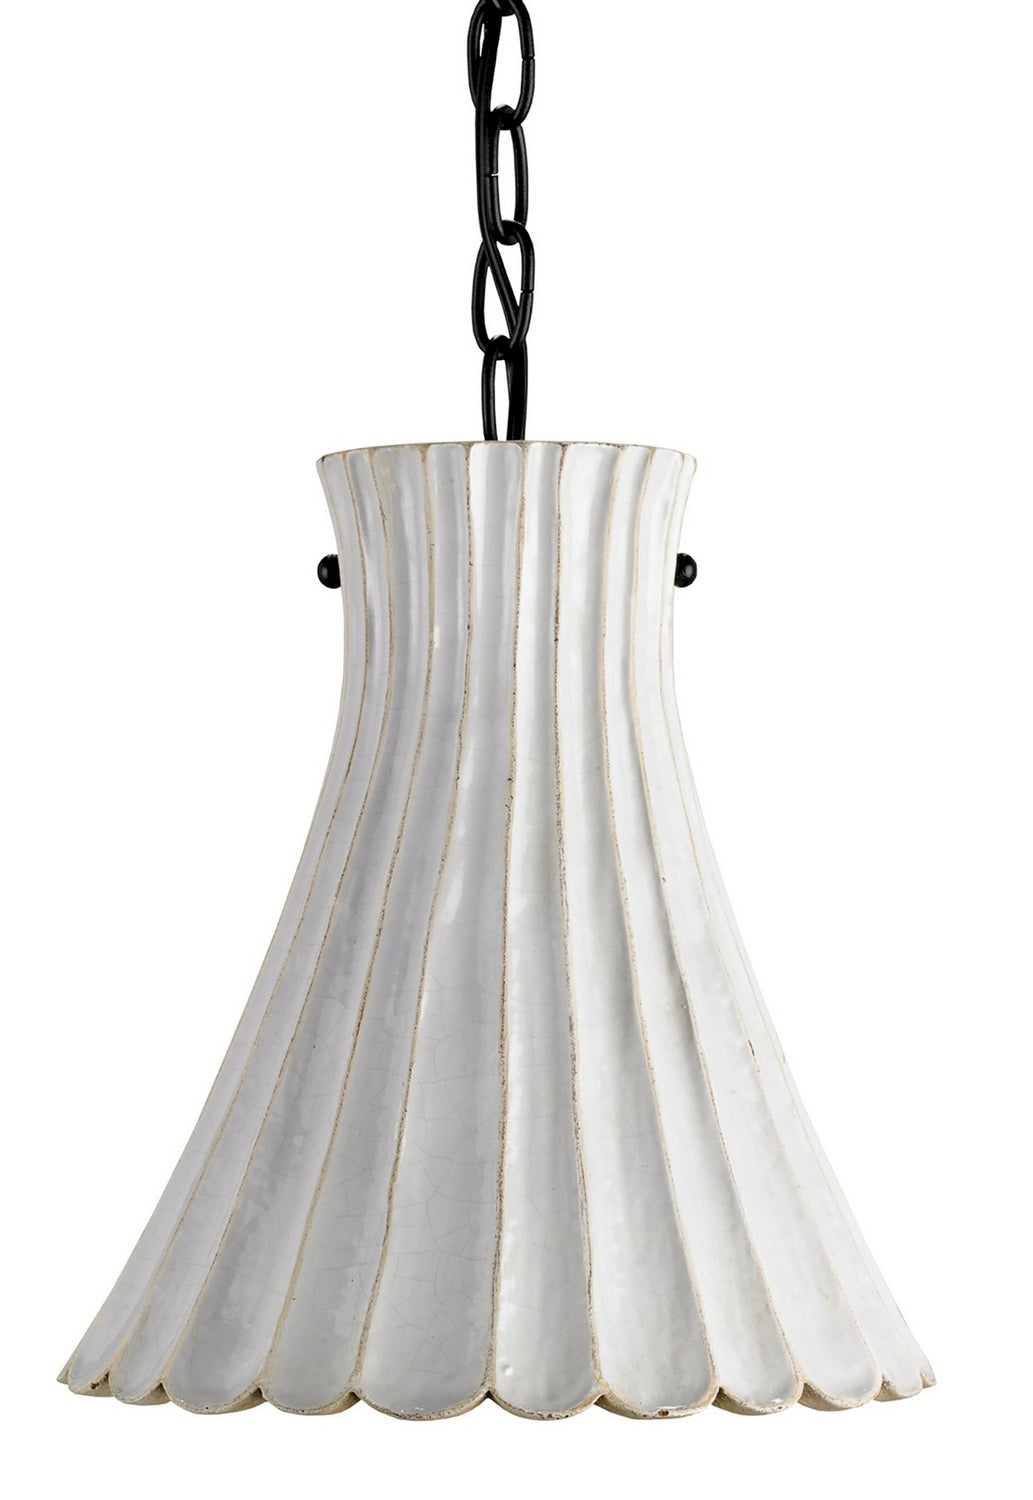 One Light Pendant from the Jazz collection in Satin Black/White Crackle finish